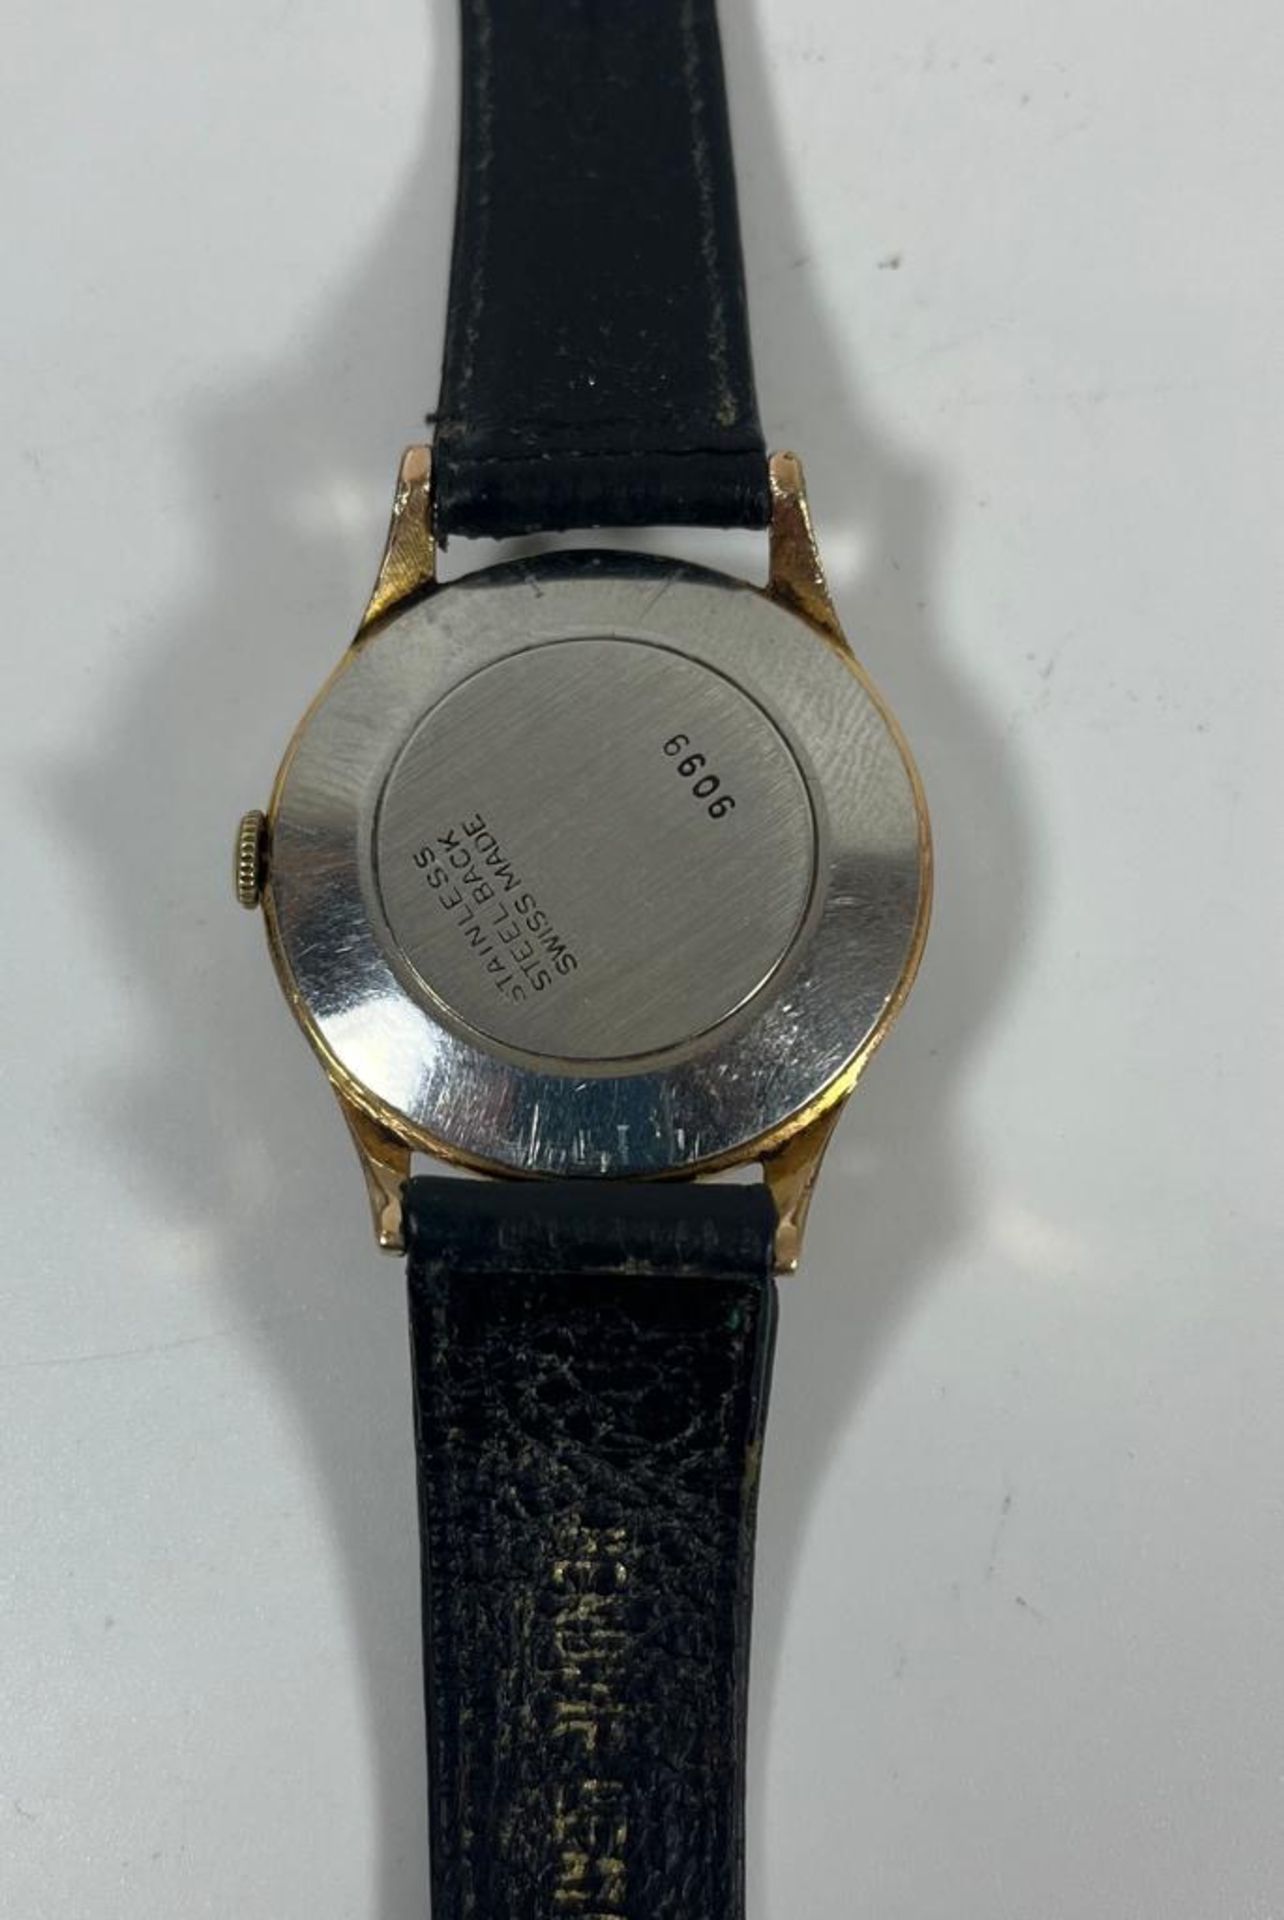 A VINTAGE SWISS MEDANA 1970S WATCH WITH SUBSIDIARY SECONDS DIAL, WORKING AT TIME OF LOTTING - Image 4 of 5